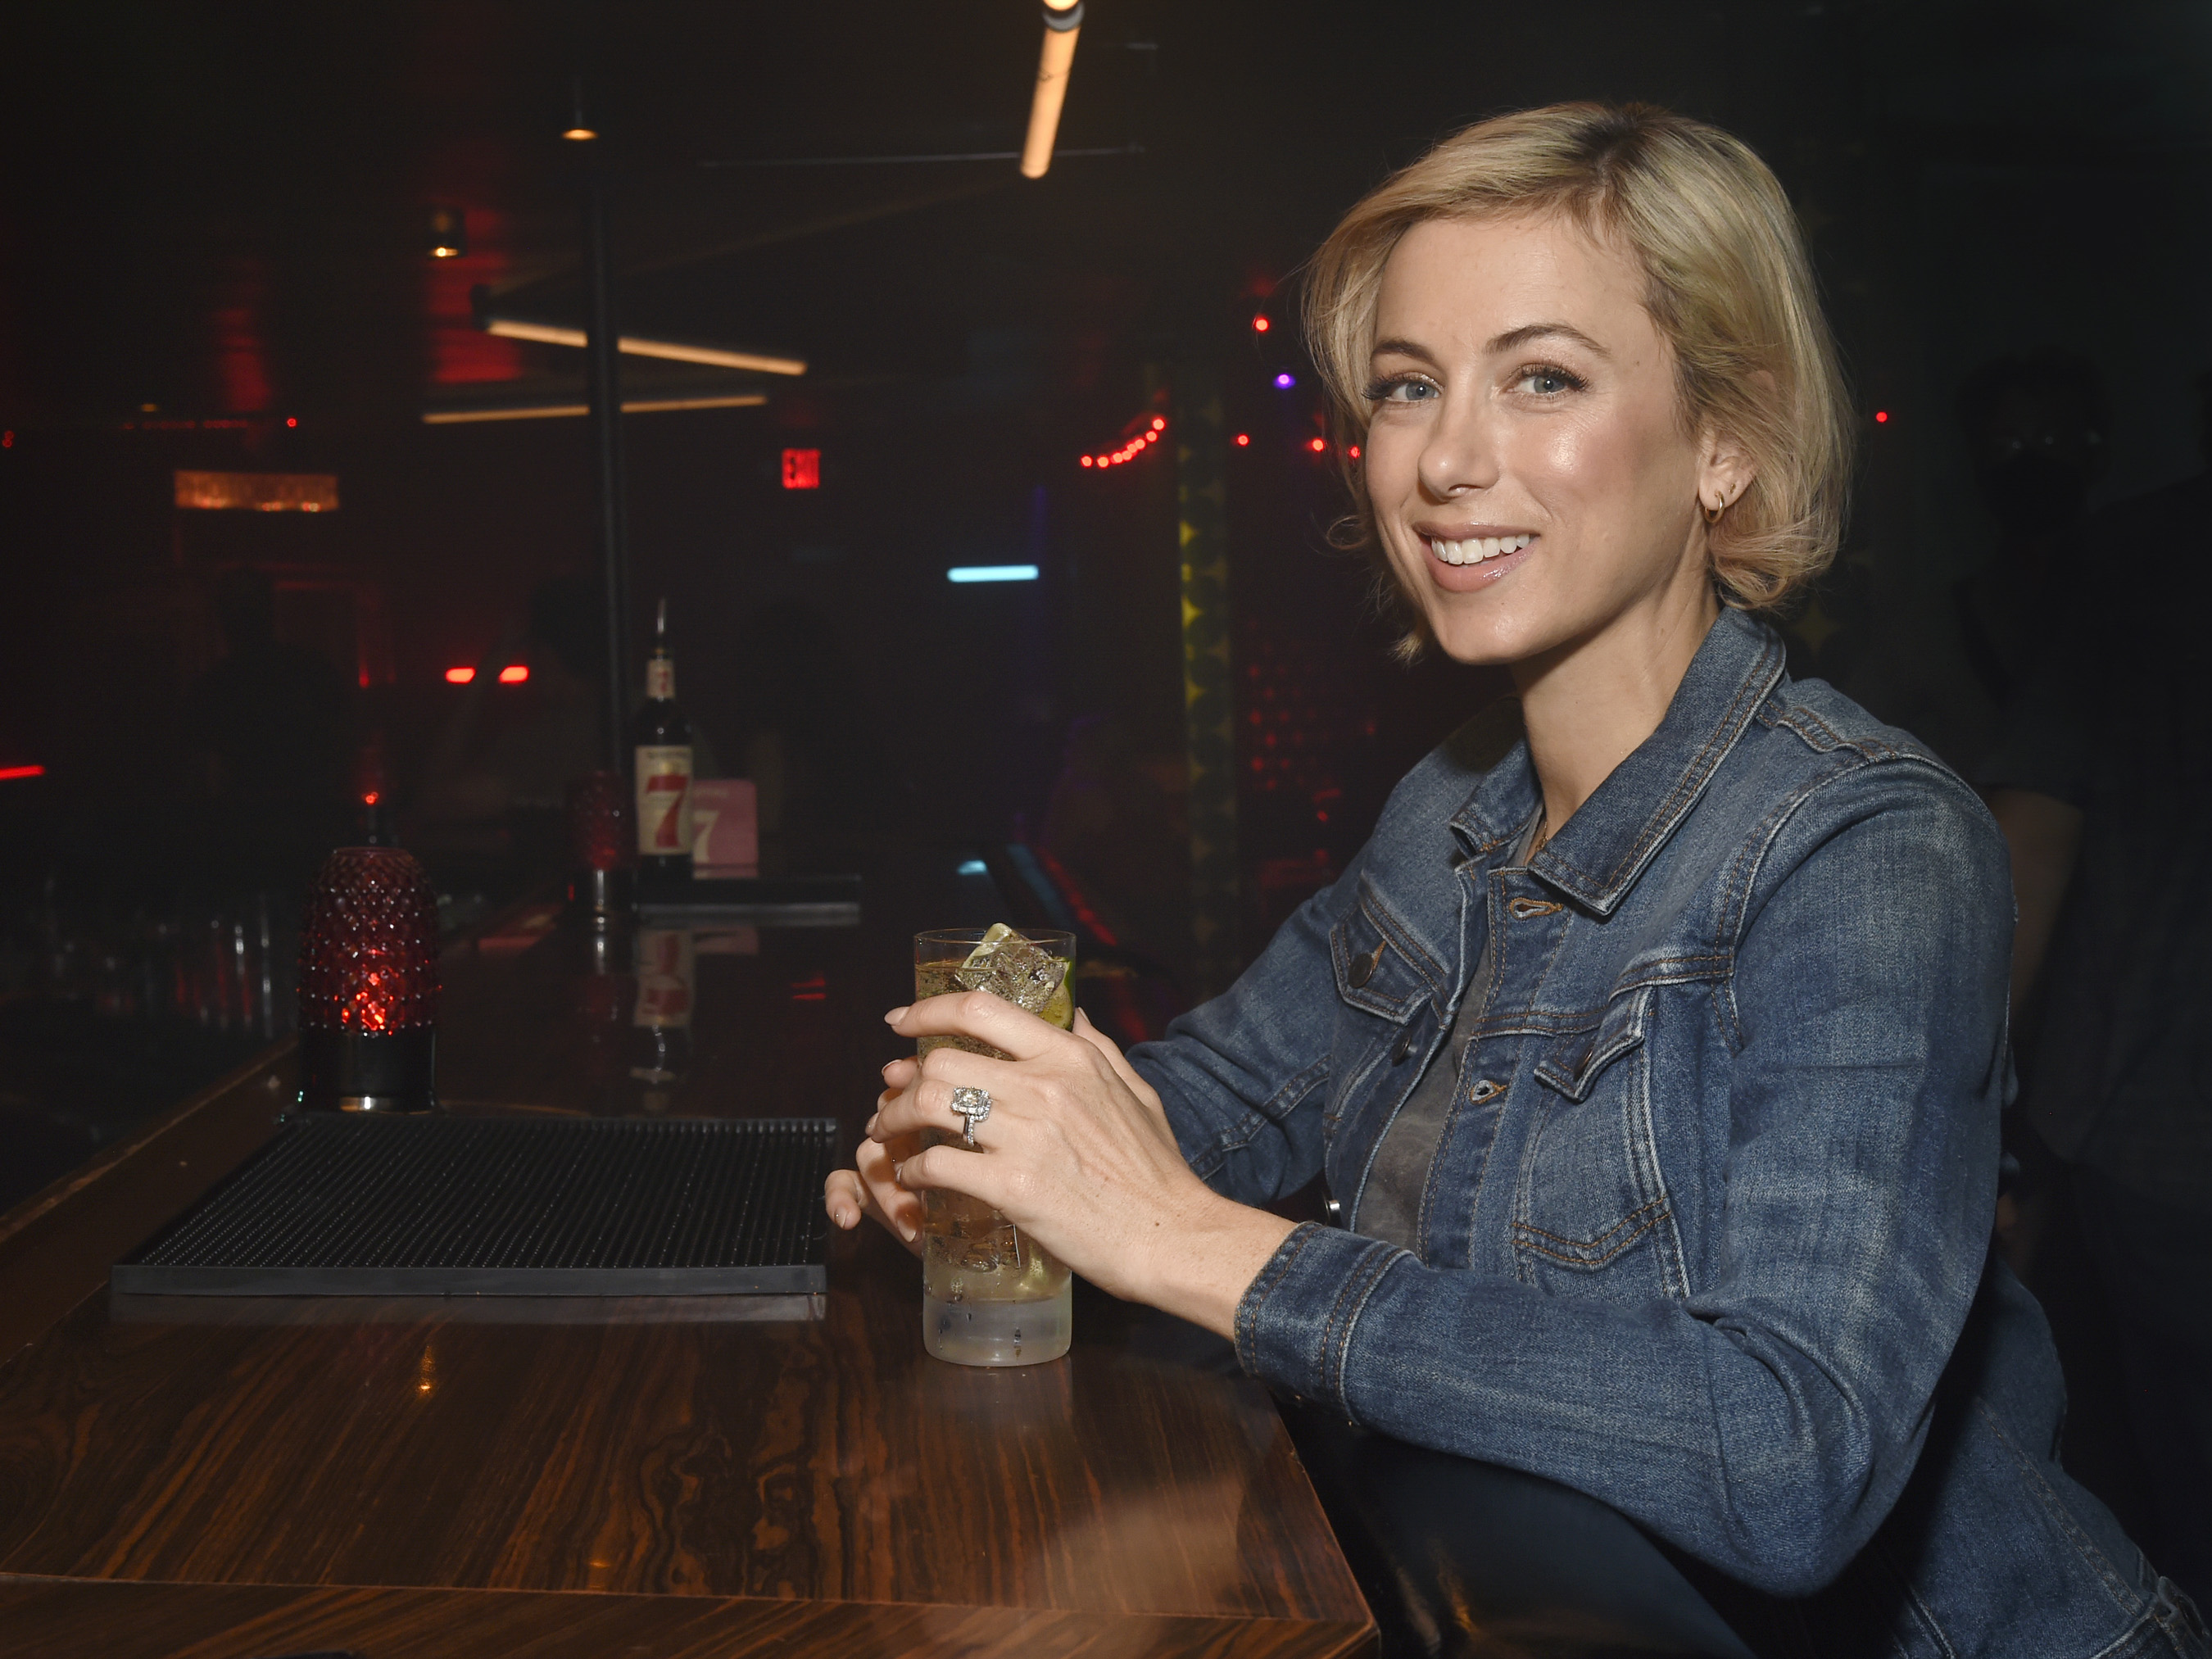 Iliza Shlesinger enjoys a classic dive bar cocktail - Seagram’s 7&7 - while giving back to small businesses and dive bars across the country.